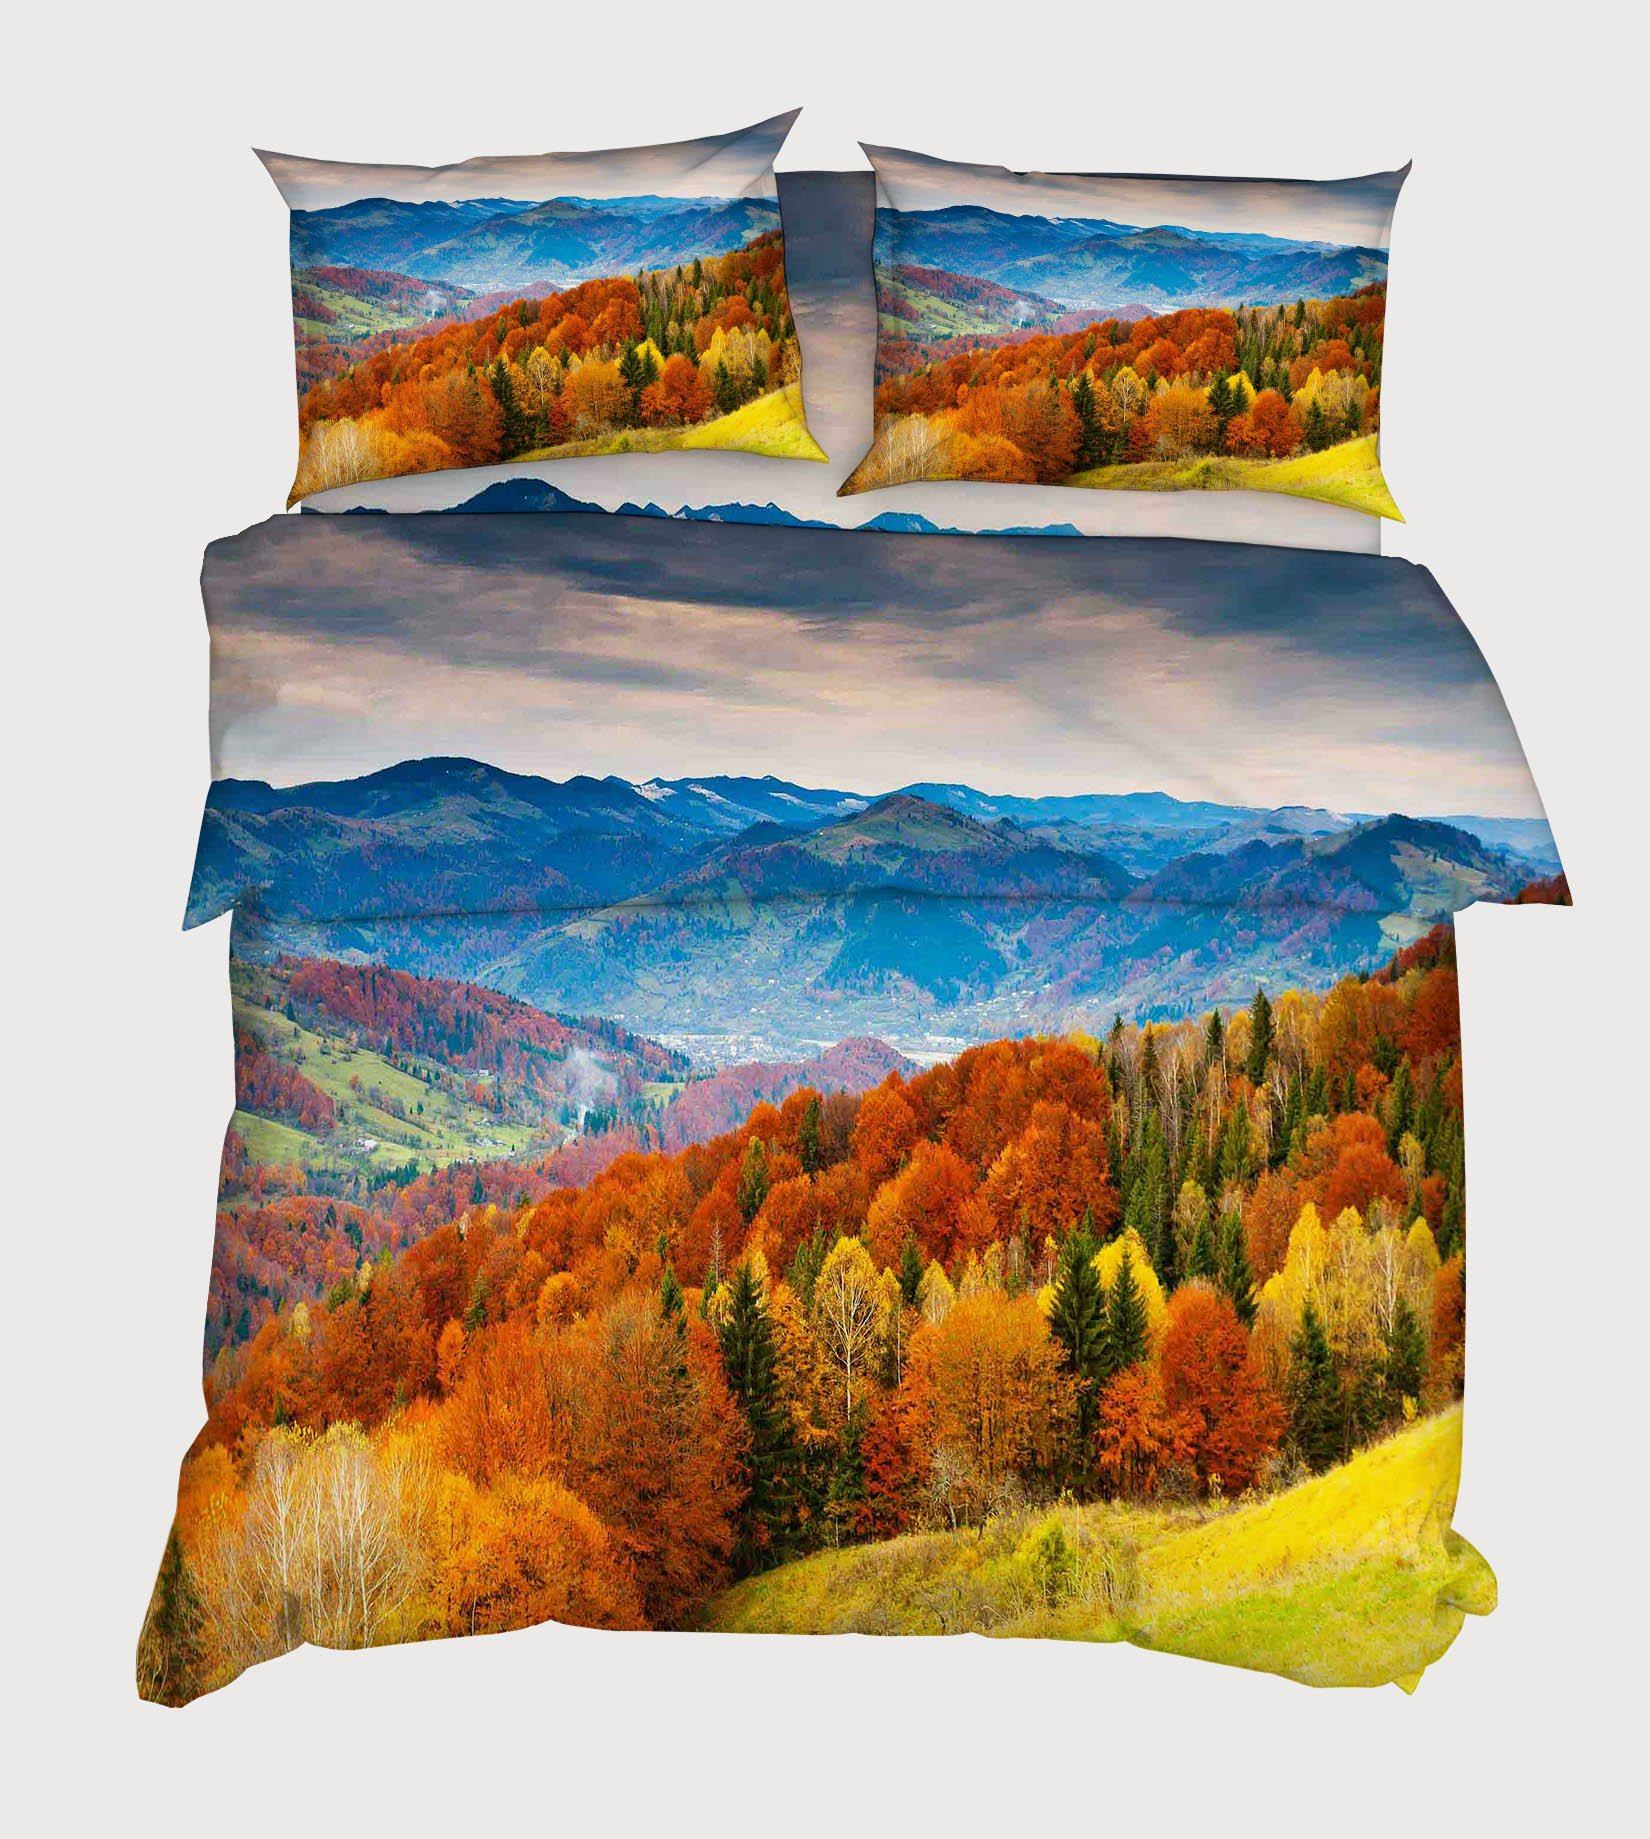 3D Mountains Scenery 95 Bed Pillowcases Quilt Wallpaper AJ Wallpaper 